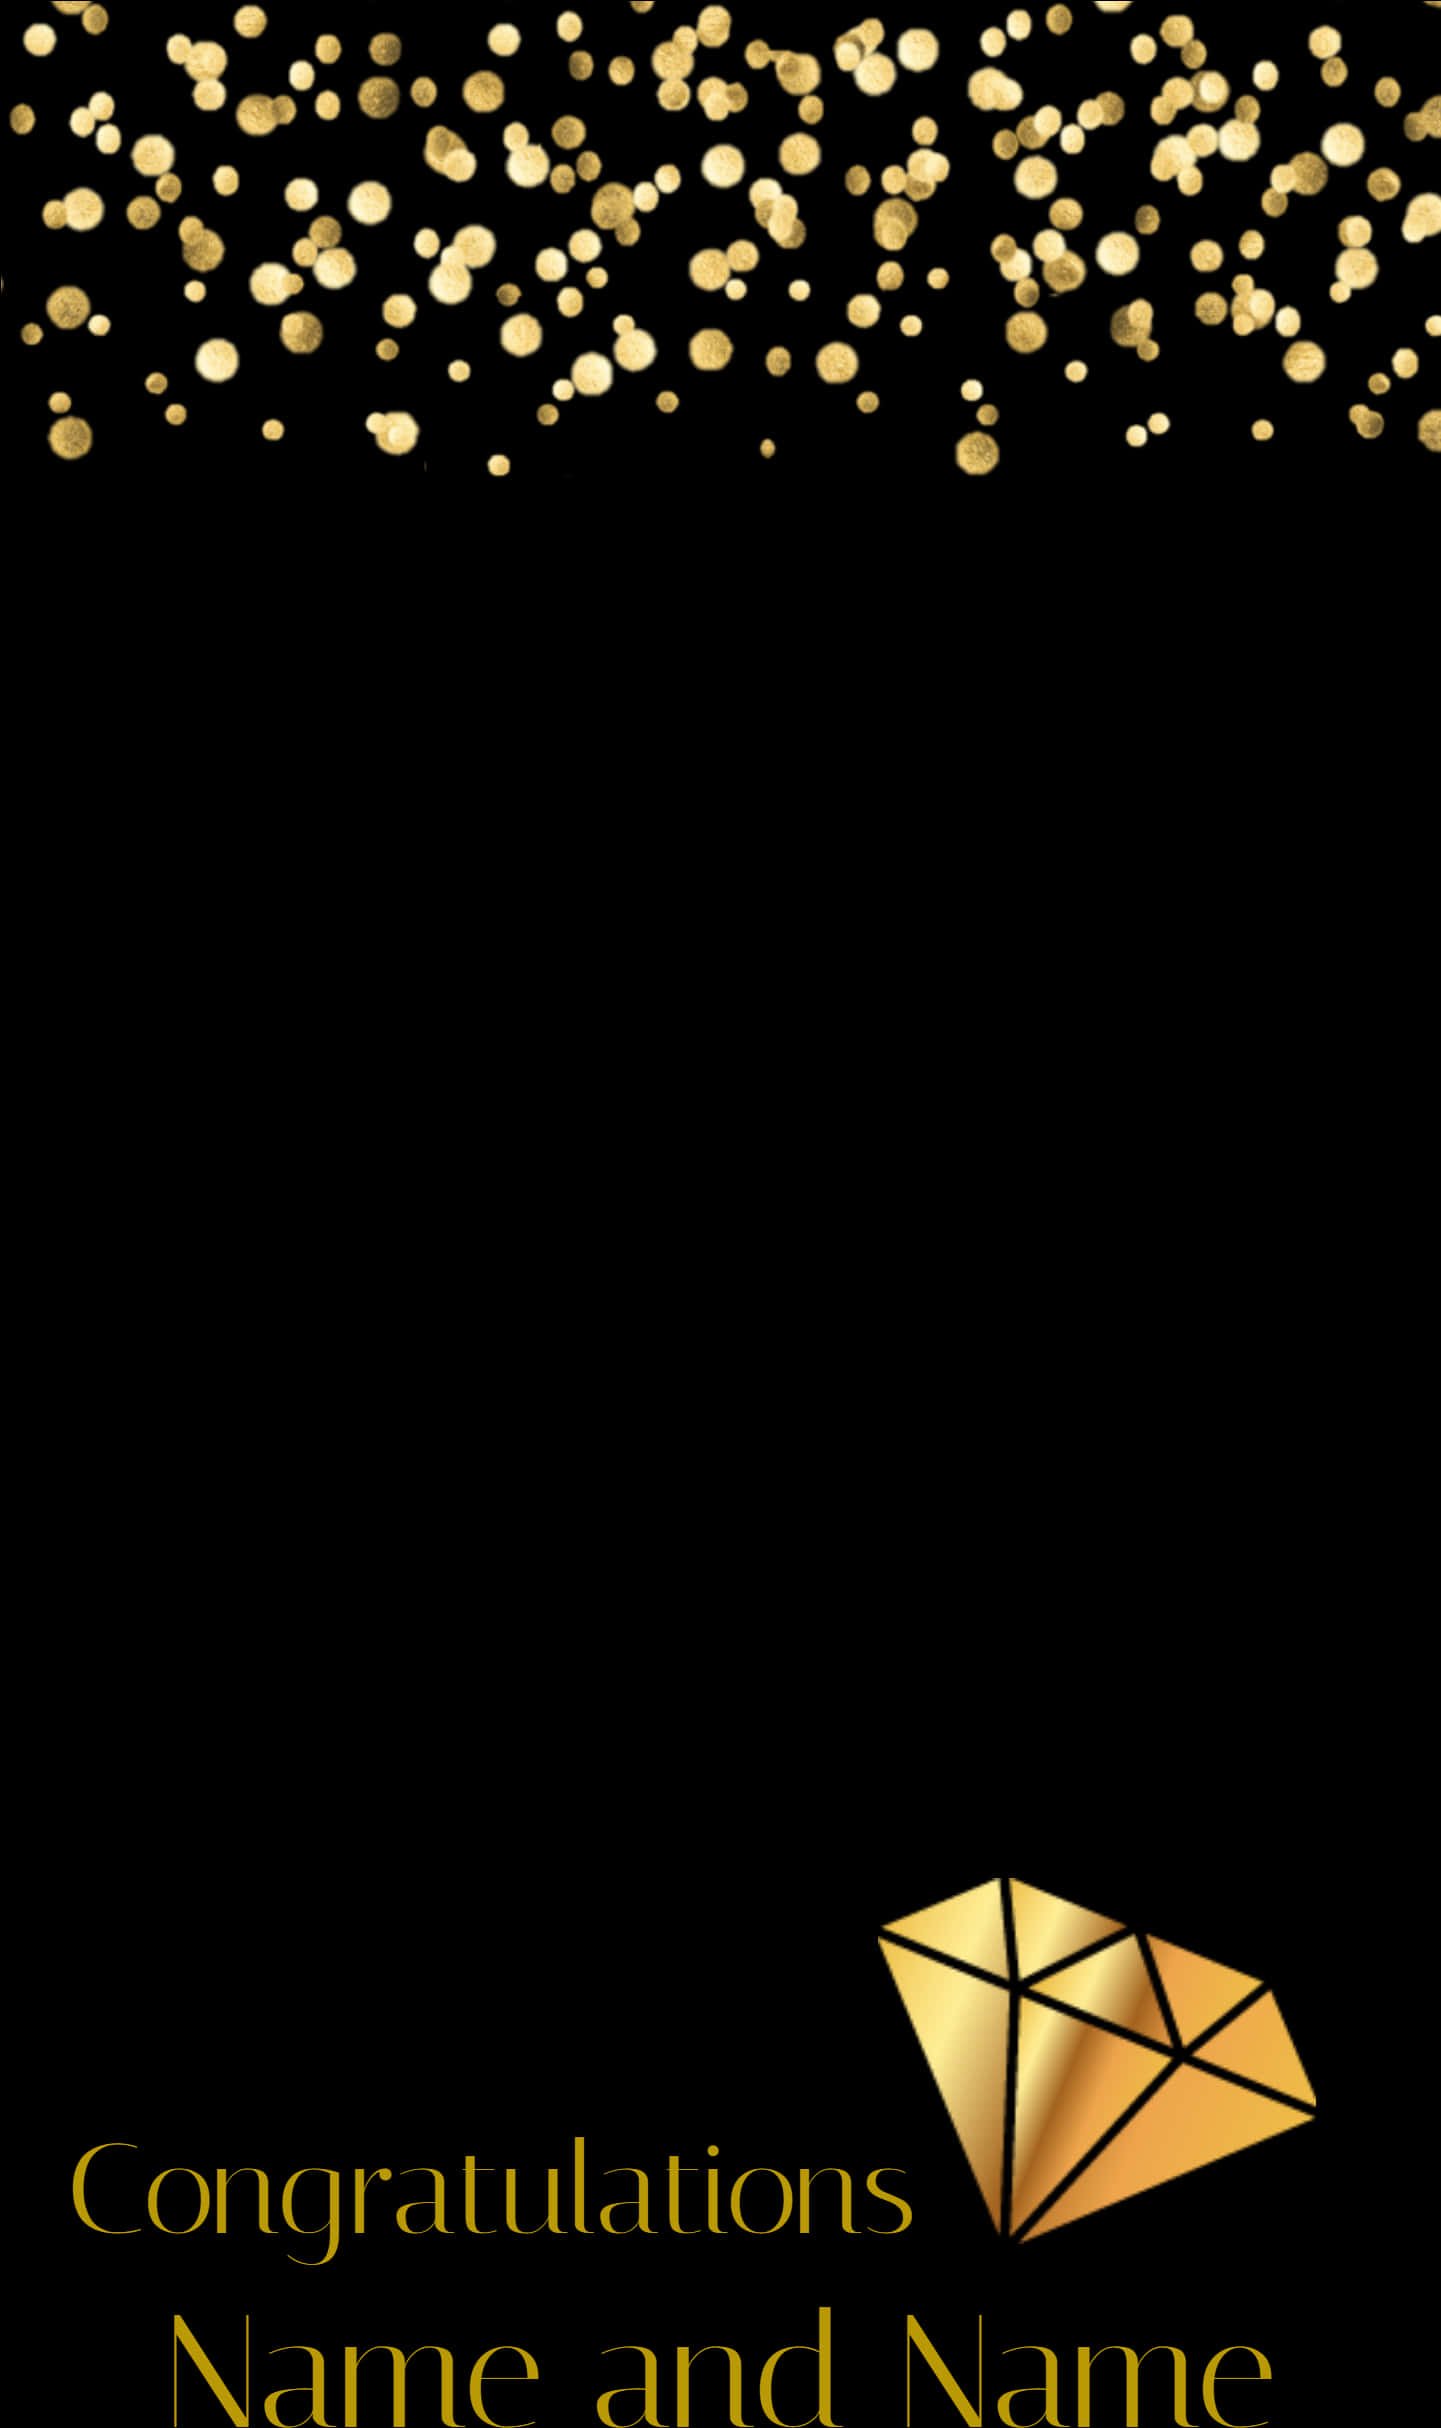 A Black Background With A Gold Object